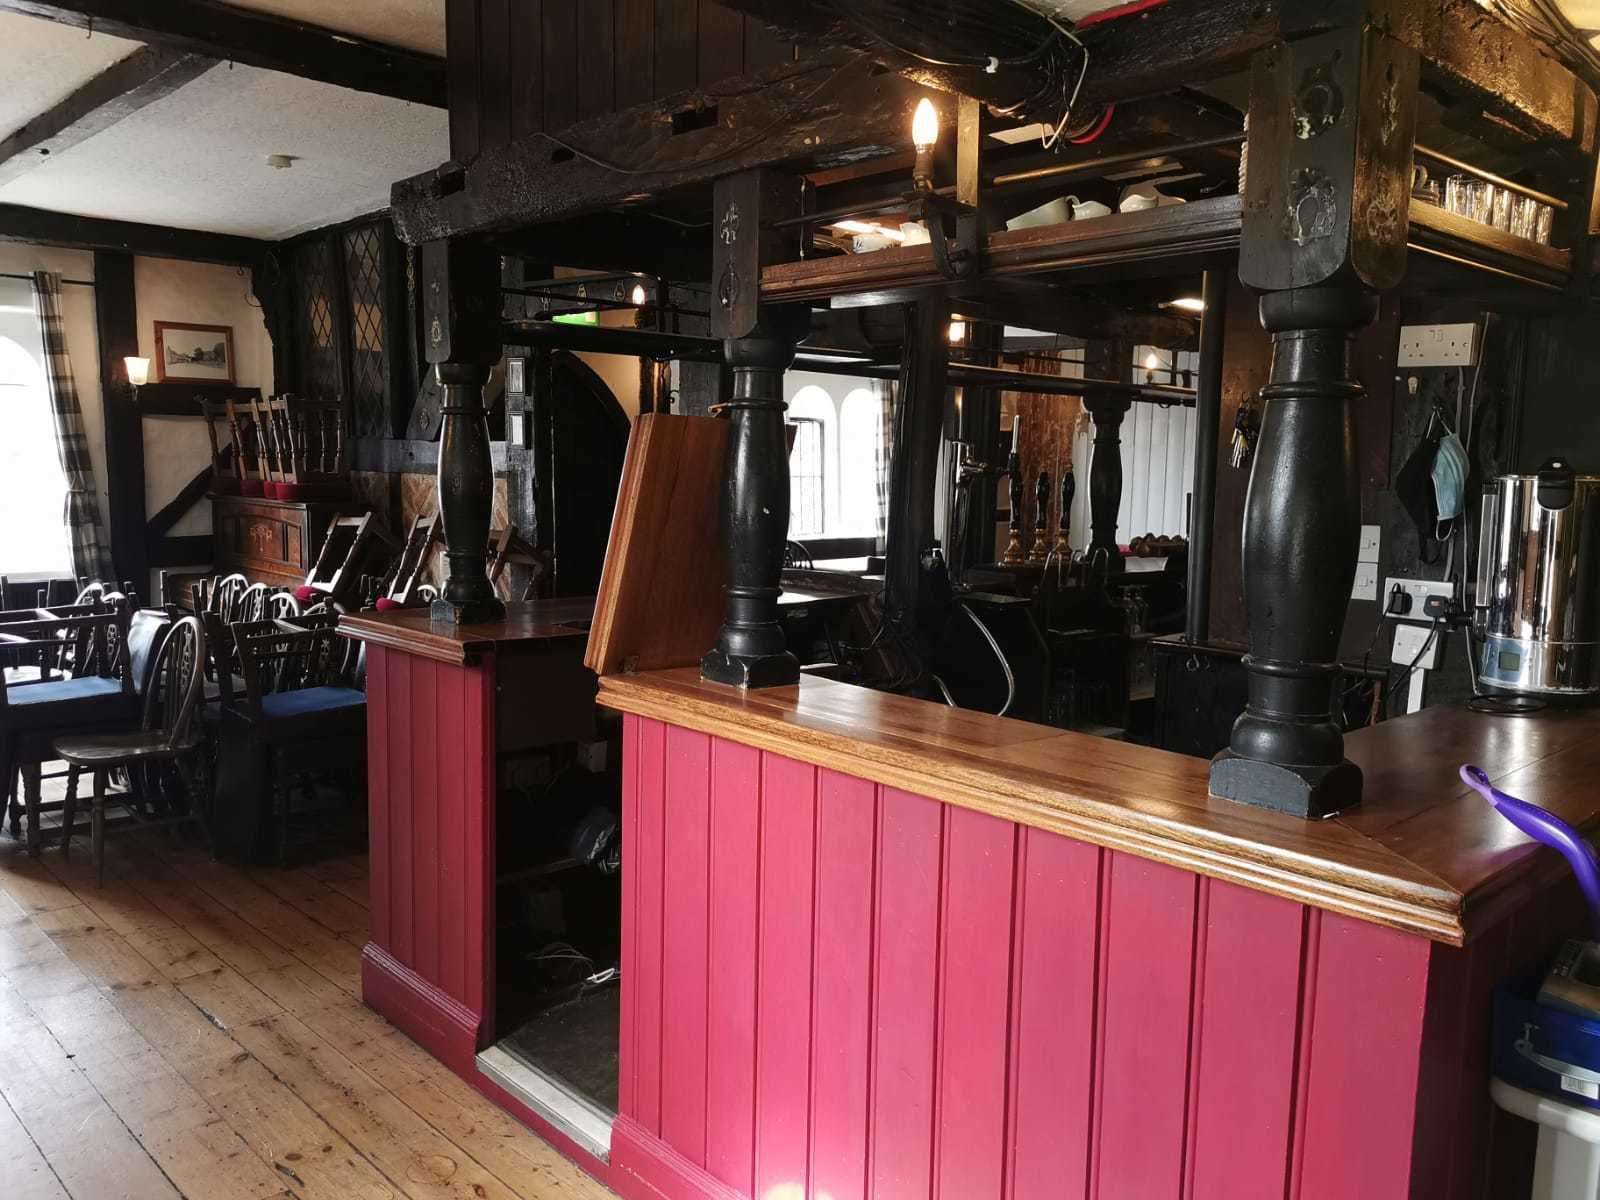 The bar used to be decked out in red